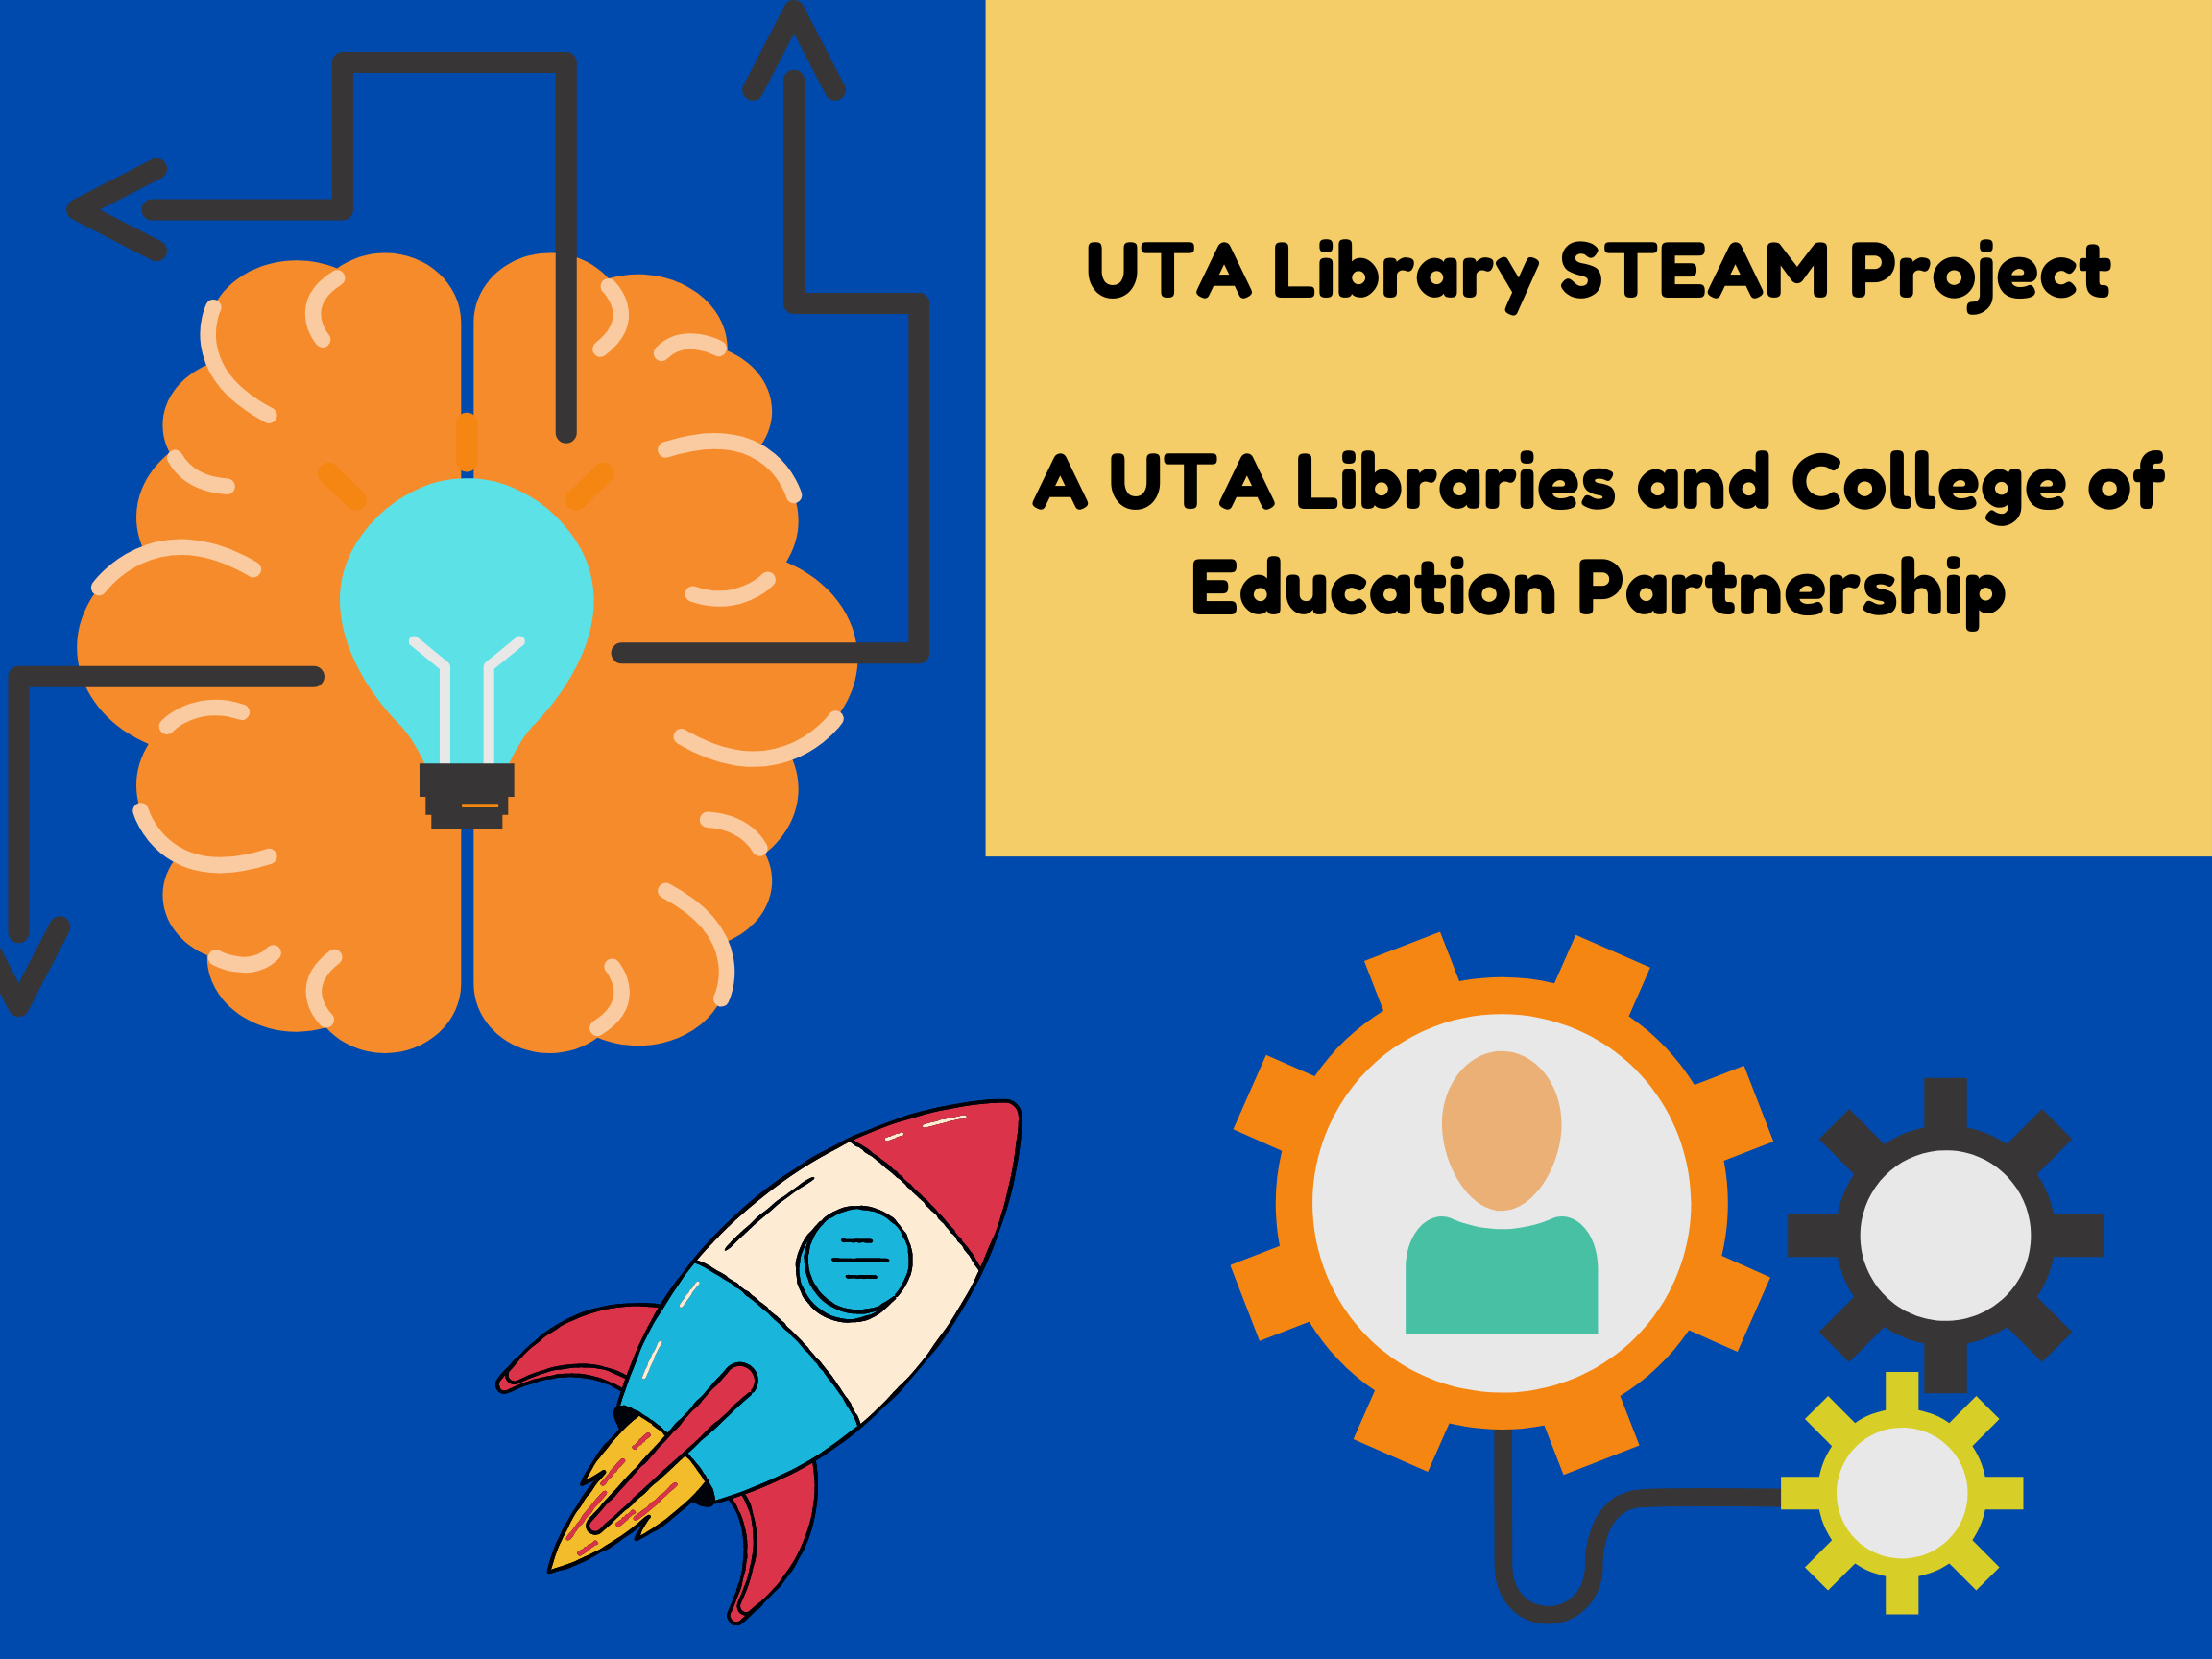 STEAM Project Student Publications